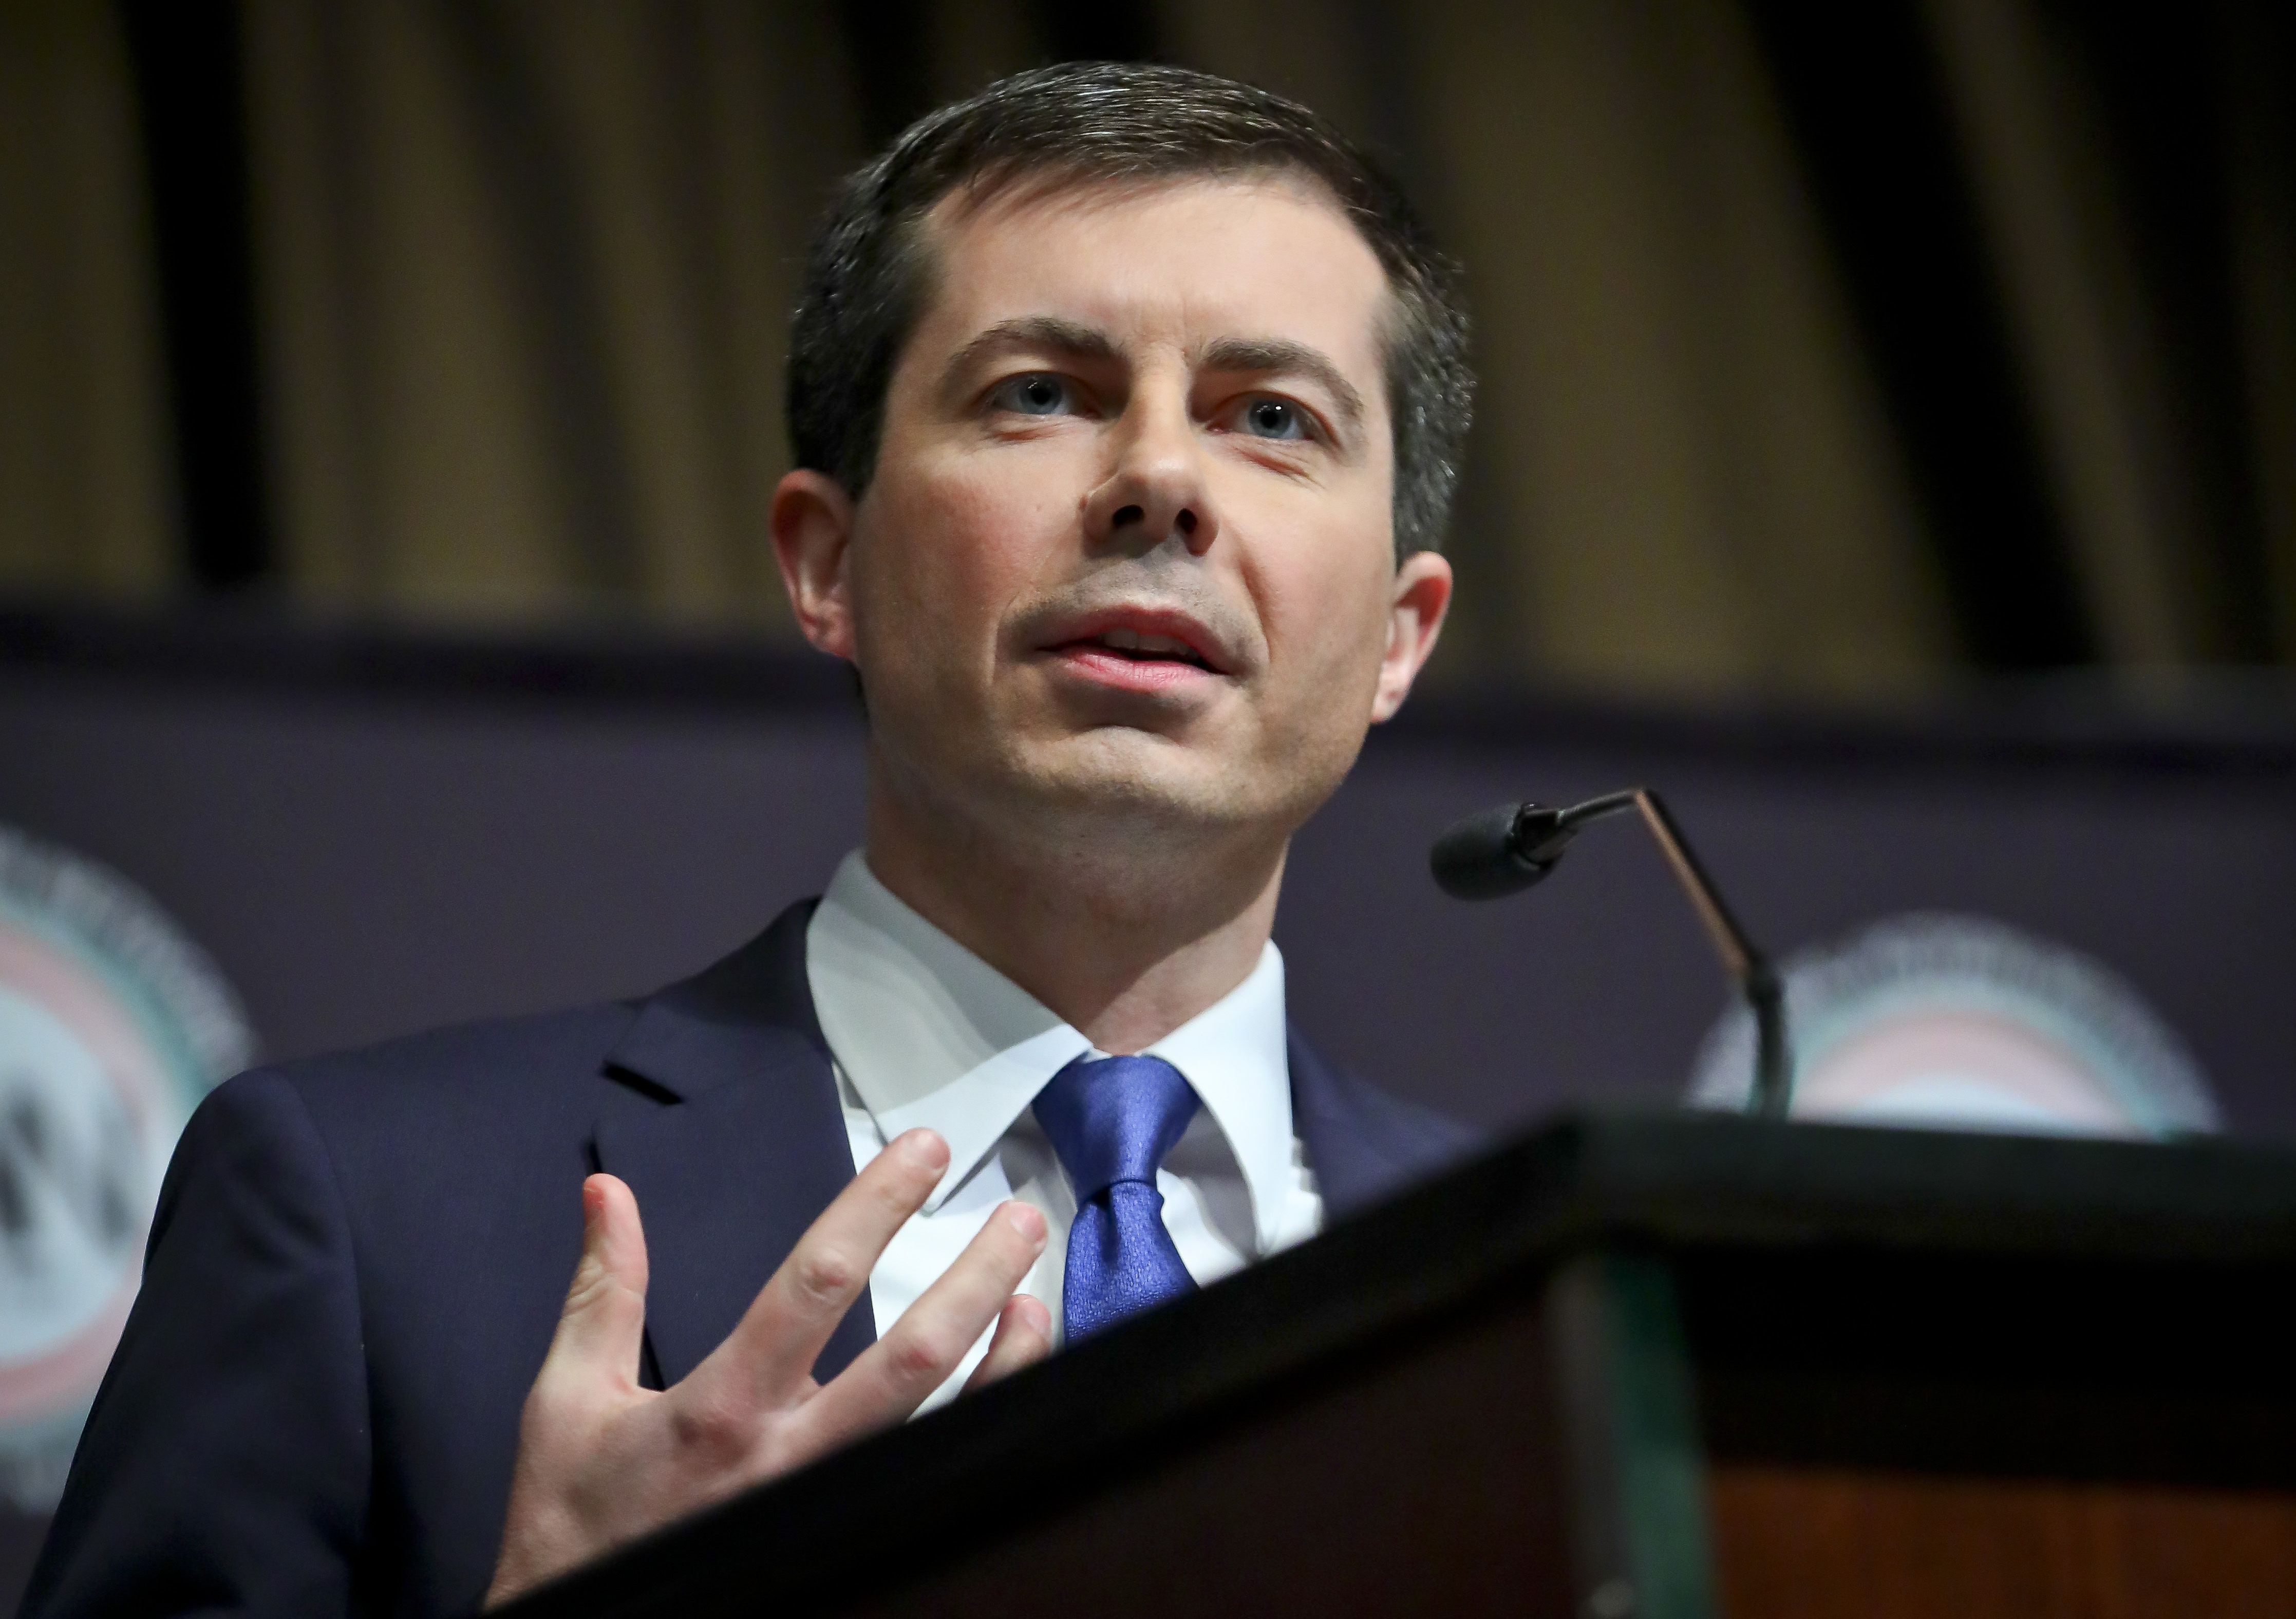 Democratic presidential candidate Pete Buttigieg, South Bend, Ind. mayor, addresses the National Action Network (NAN) convention, on April 4, 2019 in New York. (Bebeto Matthews—AP)